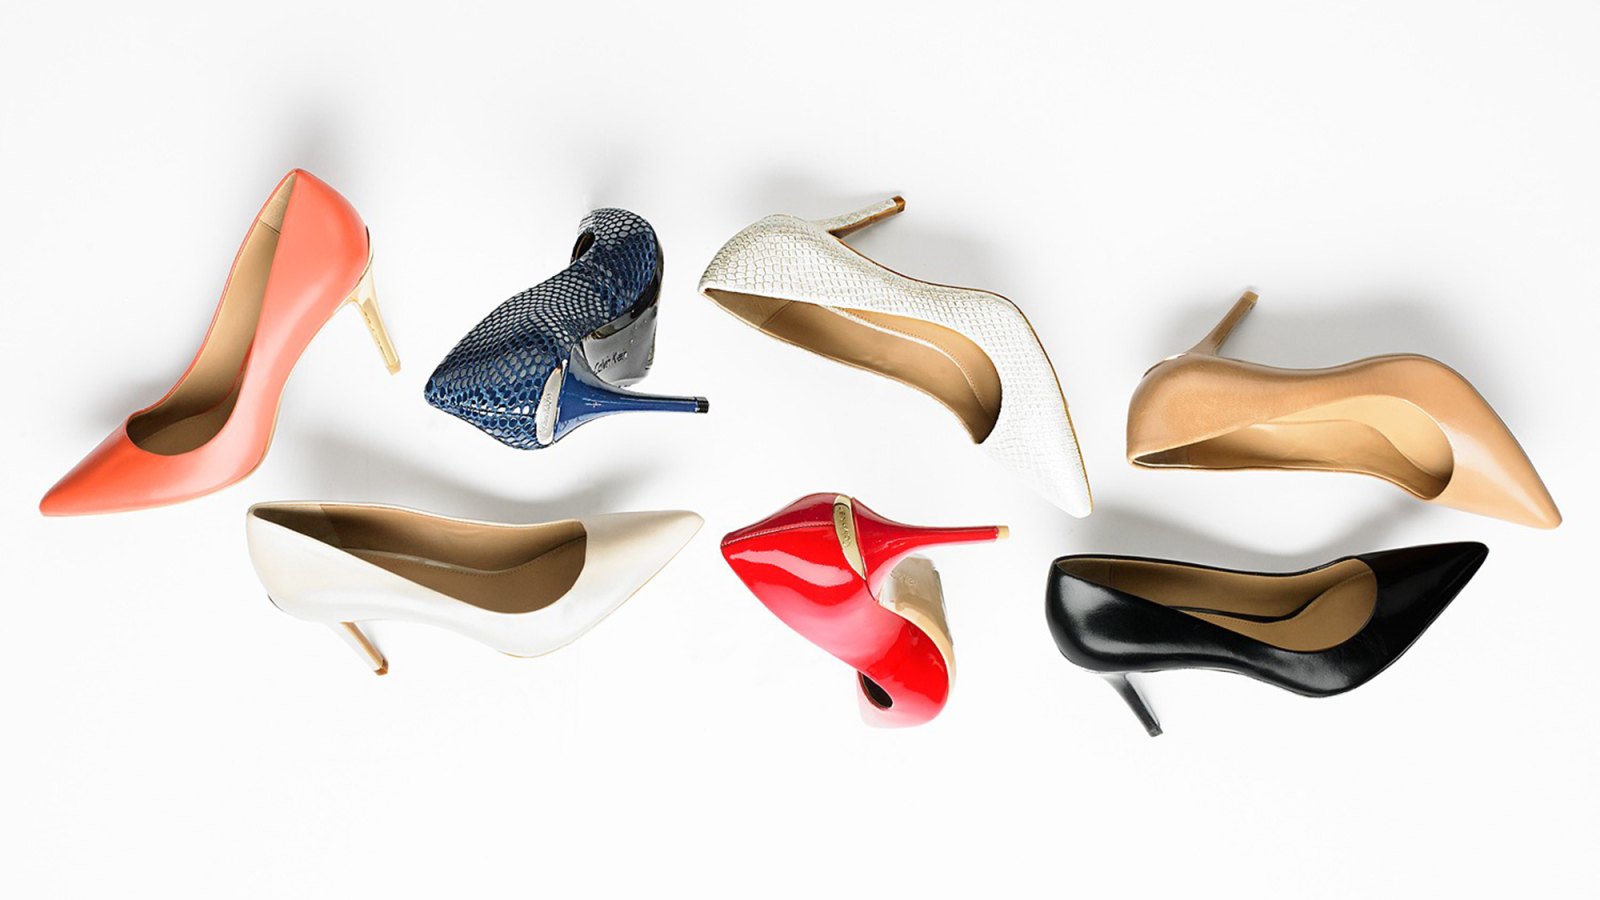 These Classy Calvin Klein Pumps Are 65% Off for One Day Only!